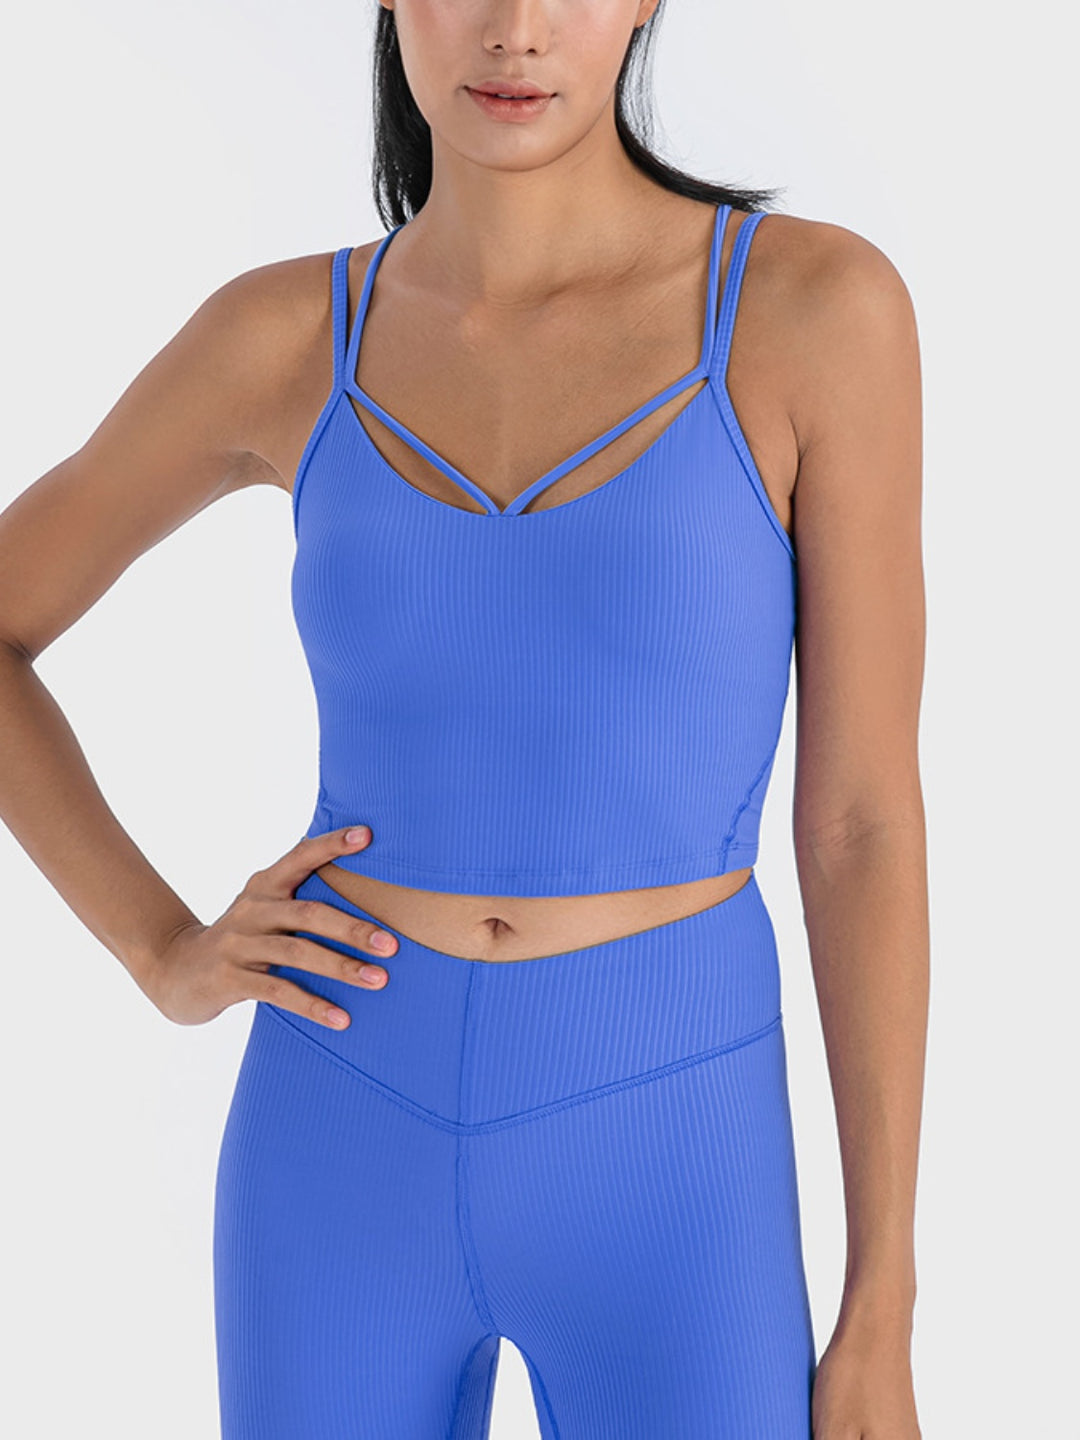 Double Strap Ribbed Sports Cami - sports Bra - Wild Willows Boutique - Massapequa, NY, affordable and fashionable clothing for women of all ages. Bottoms, tops, dresses, intimates, outerwear, sweater, shoes, accessories, jewelry, active wear, and more // Wild Willow Boutique.